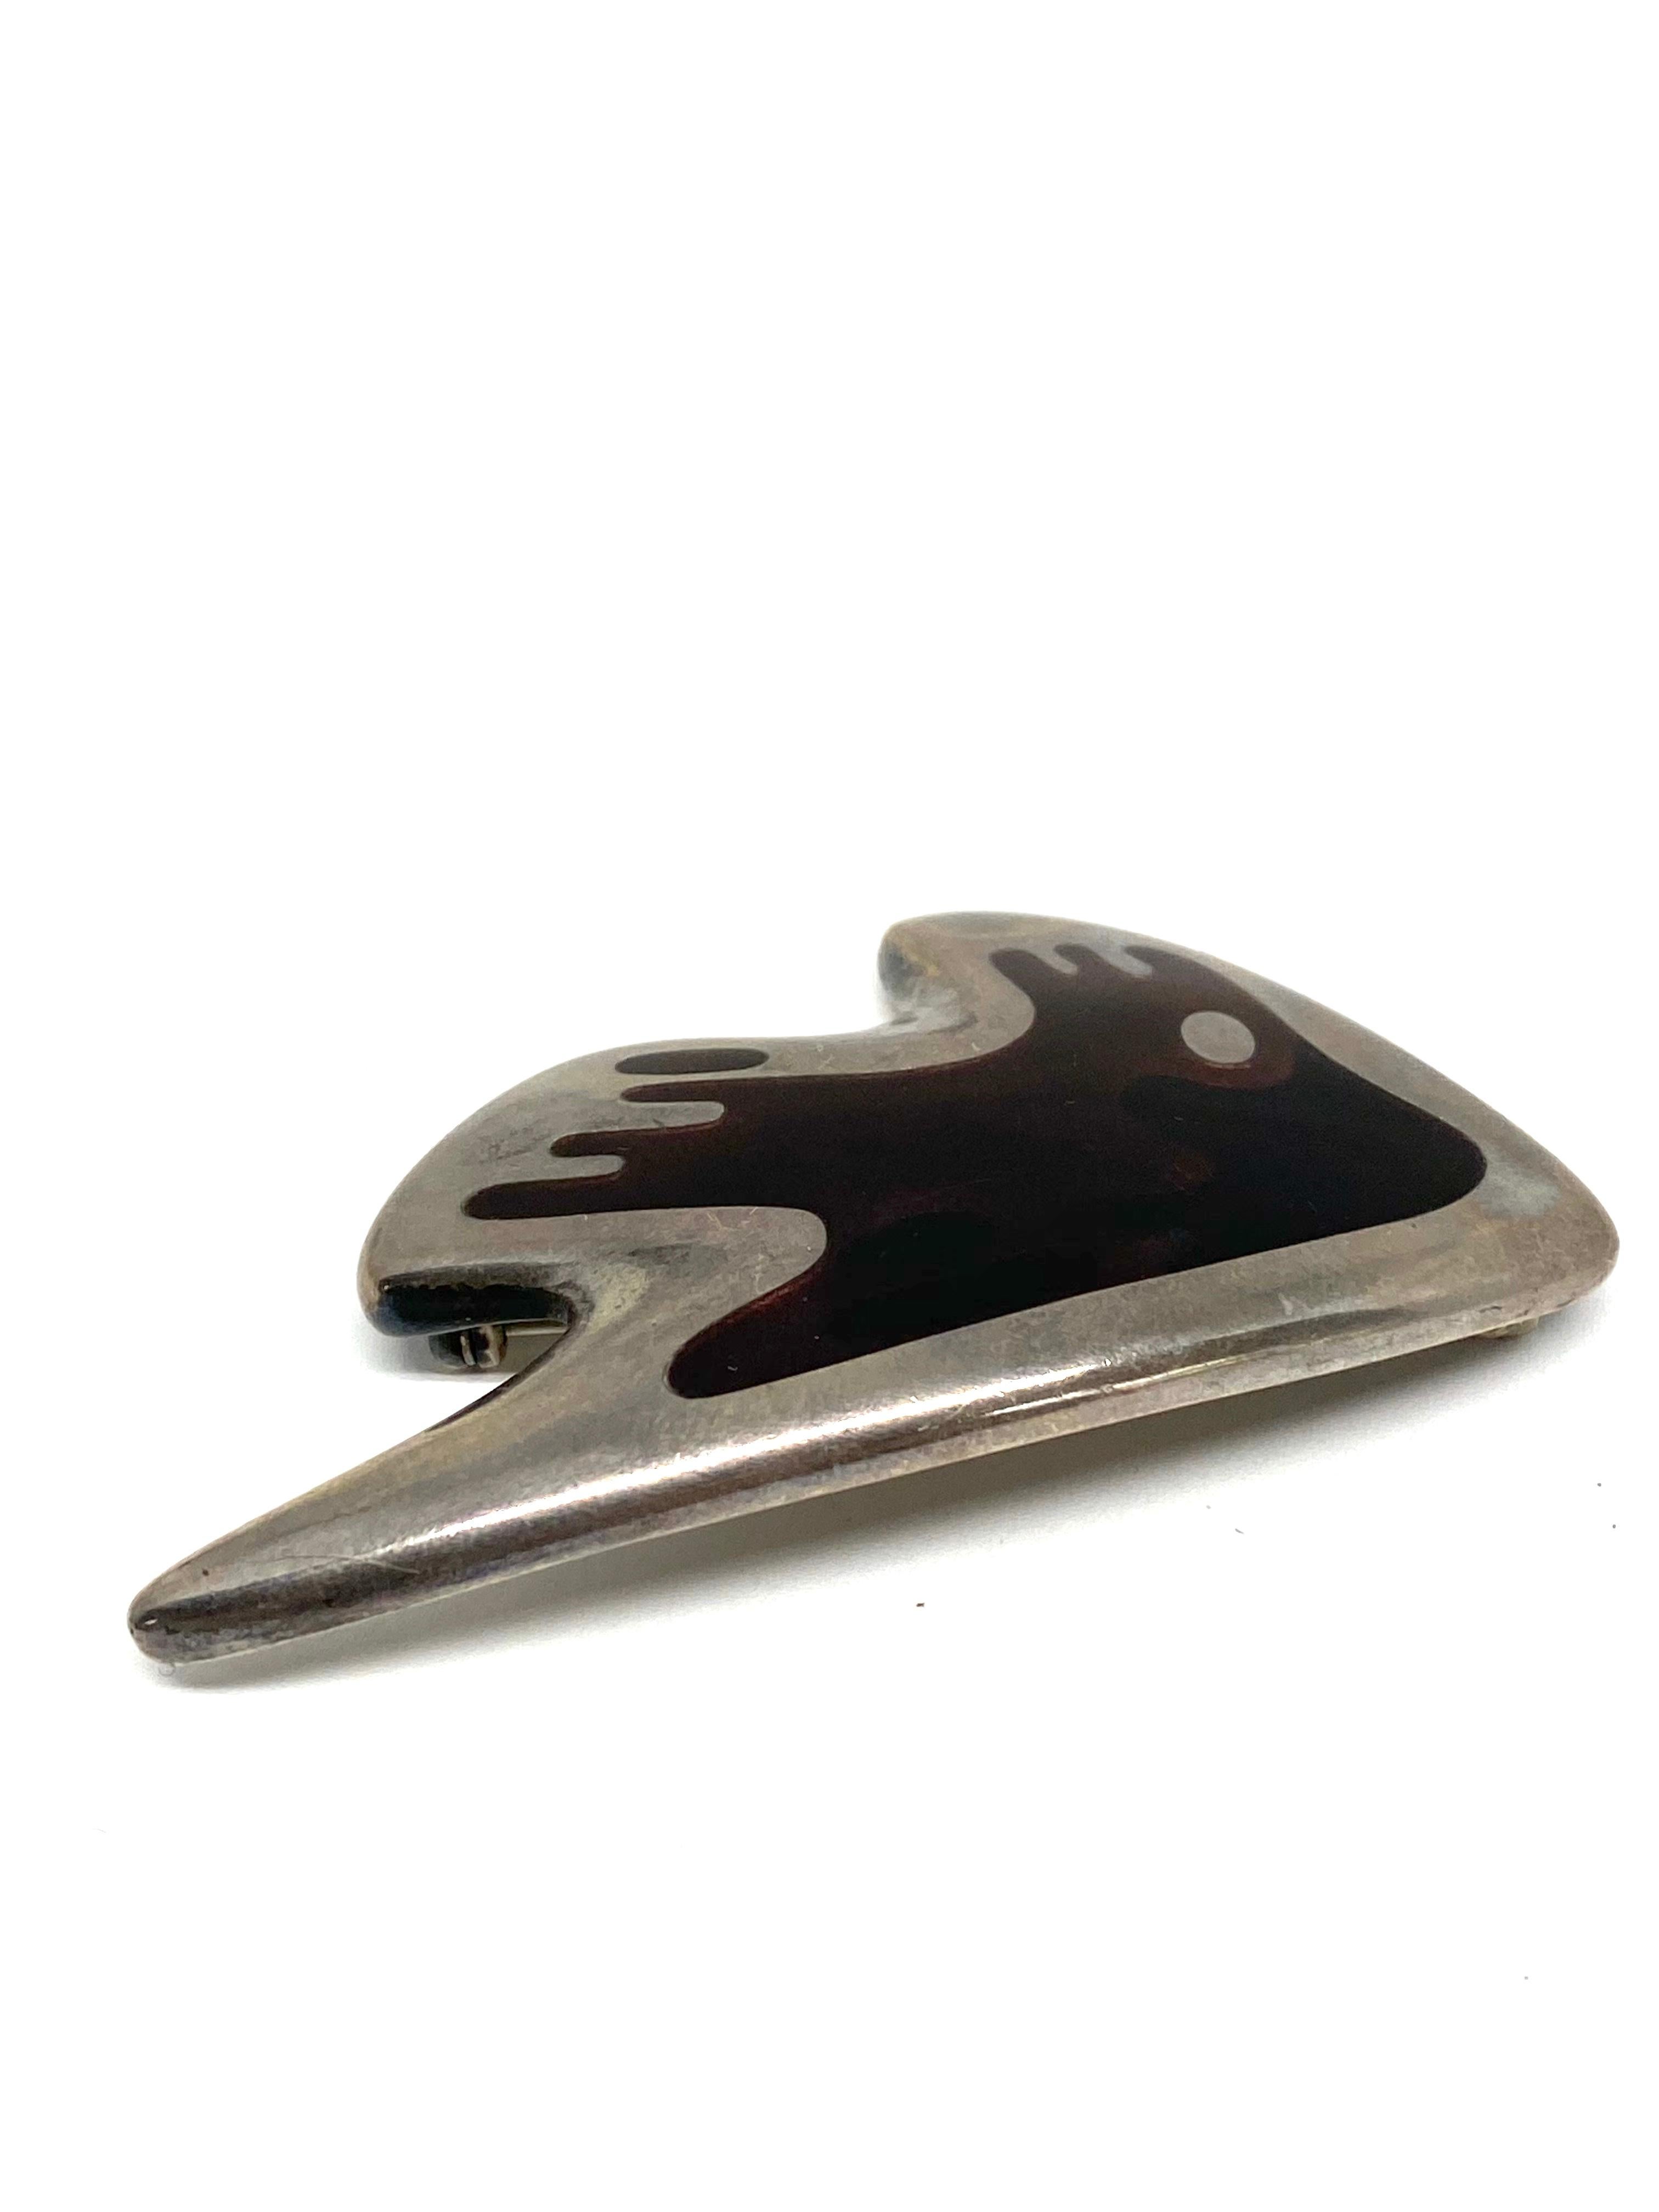 Mid- Century Modern Georg Jensen Sterling Silver & Enamel Abstract Brooch #307

Product details:
Circa 1947
Sterling silver and two- tone enamel detailed design 
Designed by Henning Koppel
Inspired by the sea 
Signed Georg Jensen HK, stamped